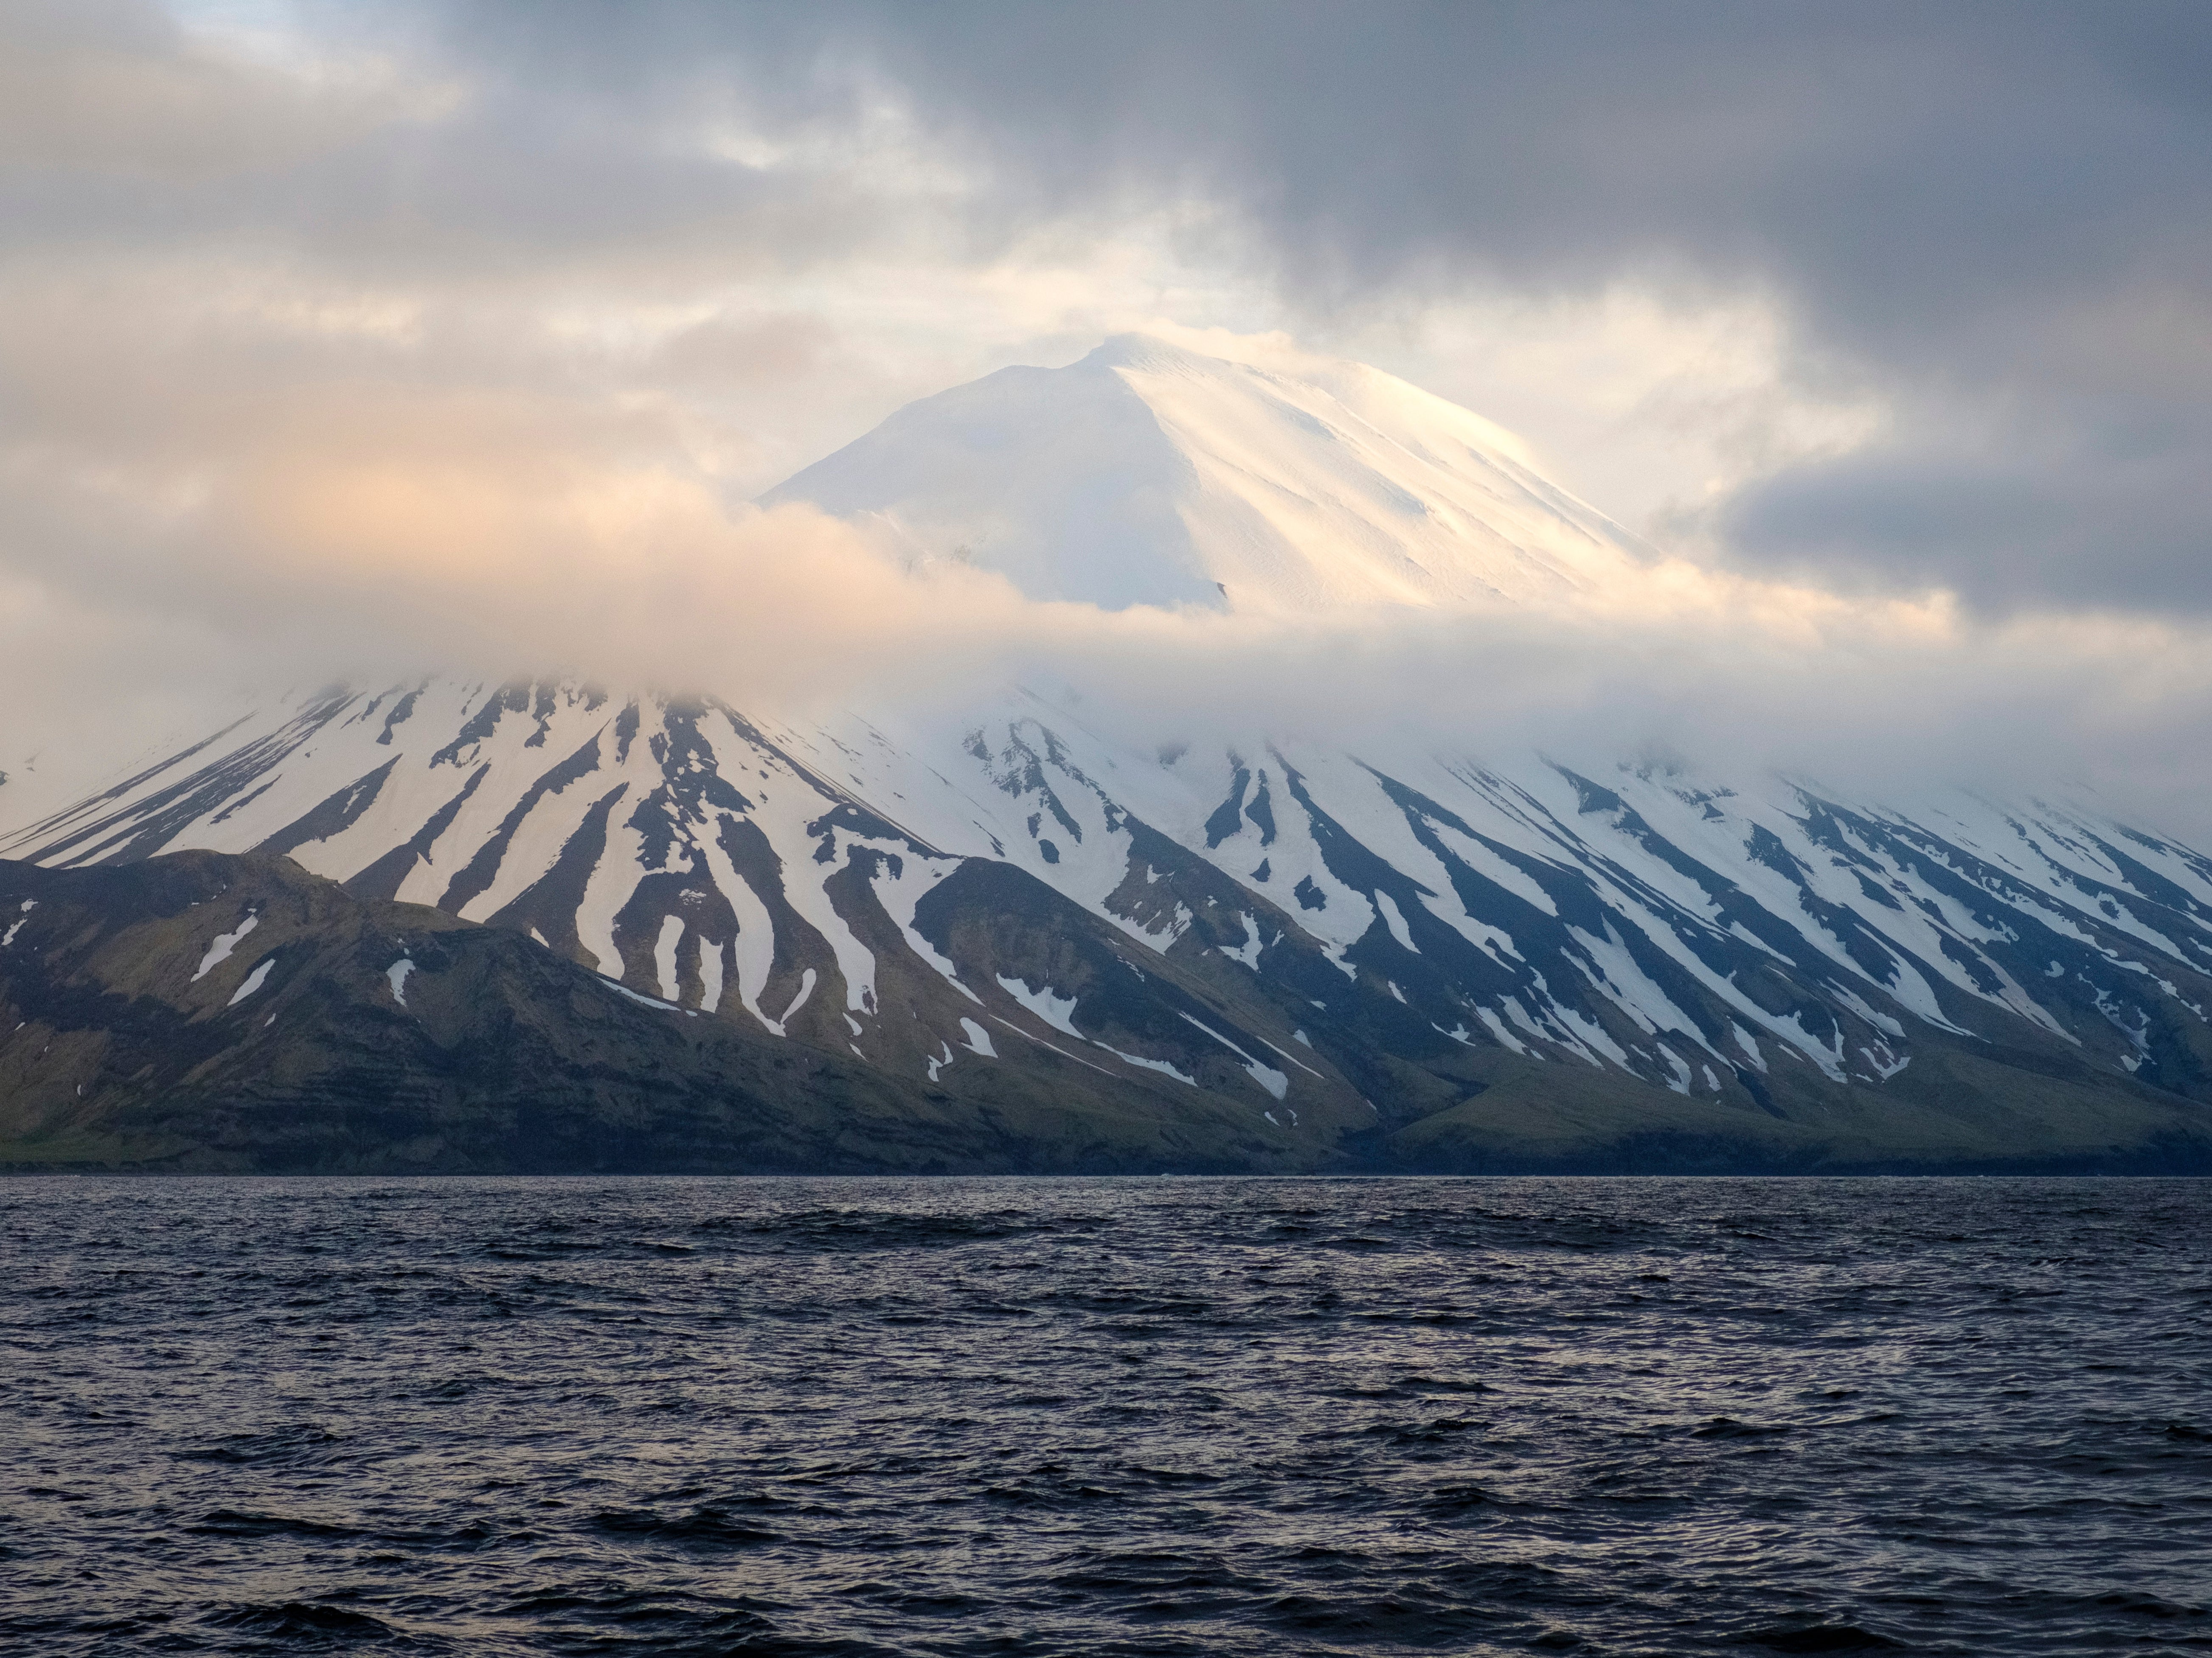 Earthquake activity at two Alaska volcanoes could signal eruption, officials warn The Independent